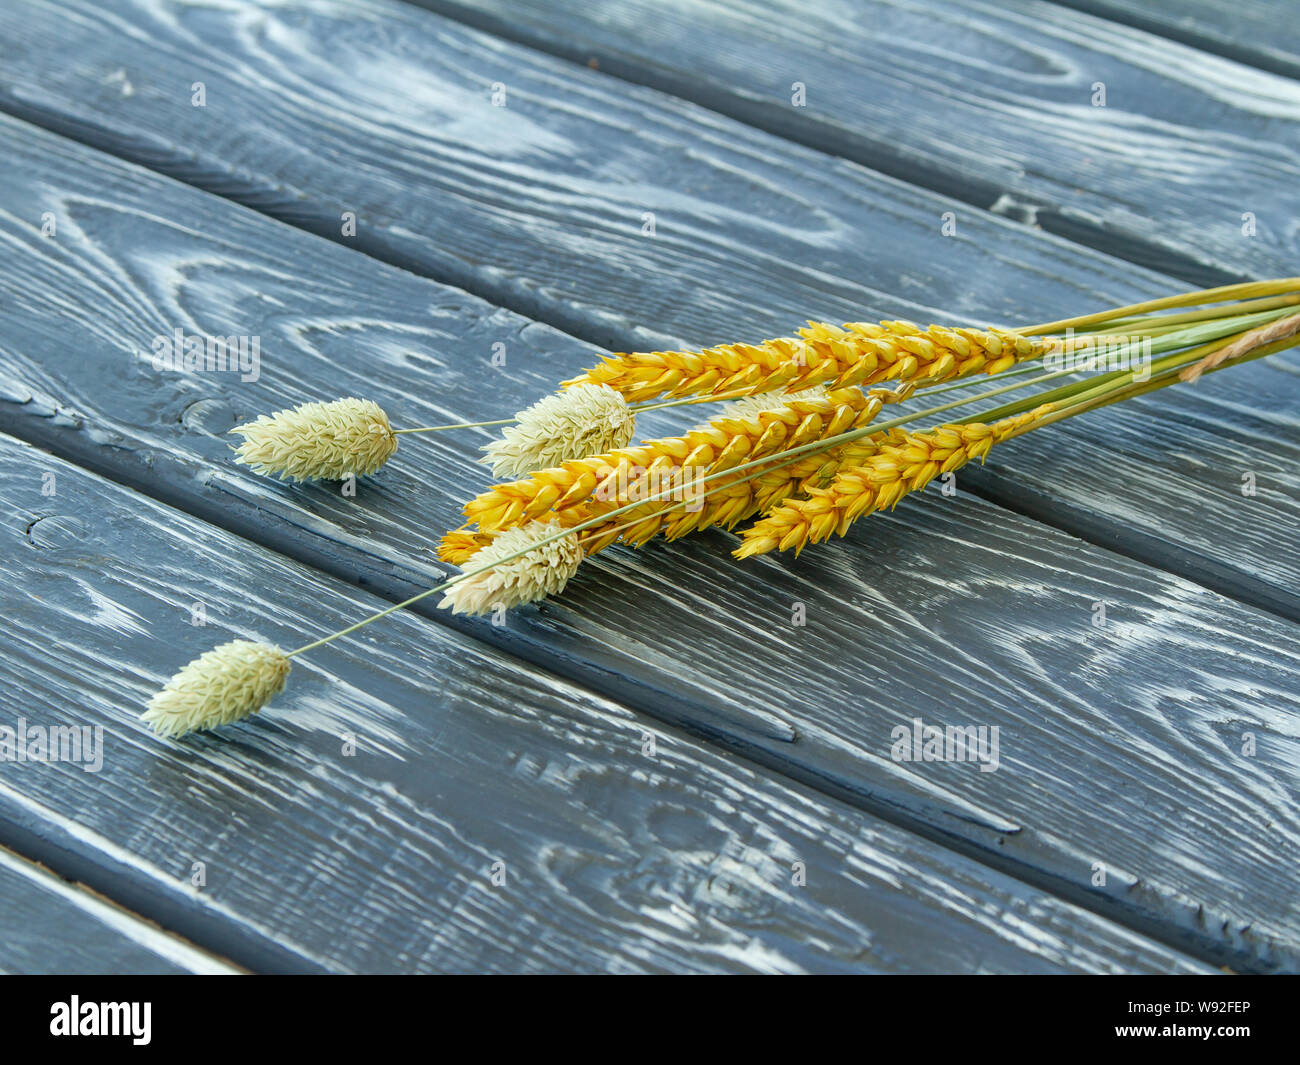 Several stalks of dried cereal plants on a boardwalk. Ears of wheat and phalaris for decorating food photos Stock Photo